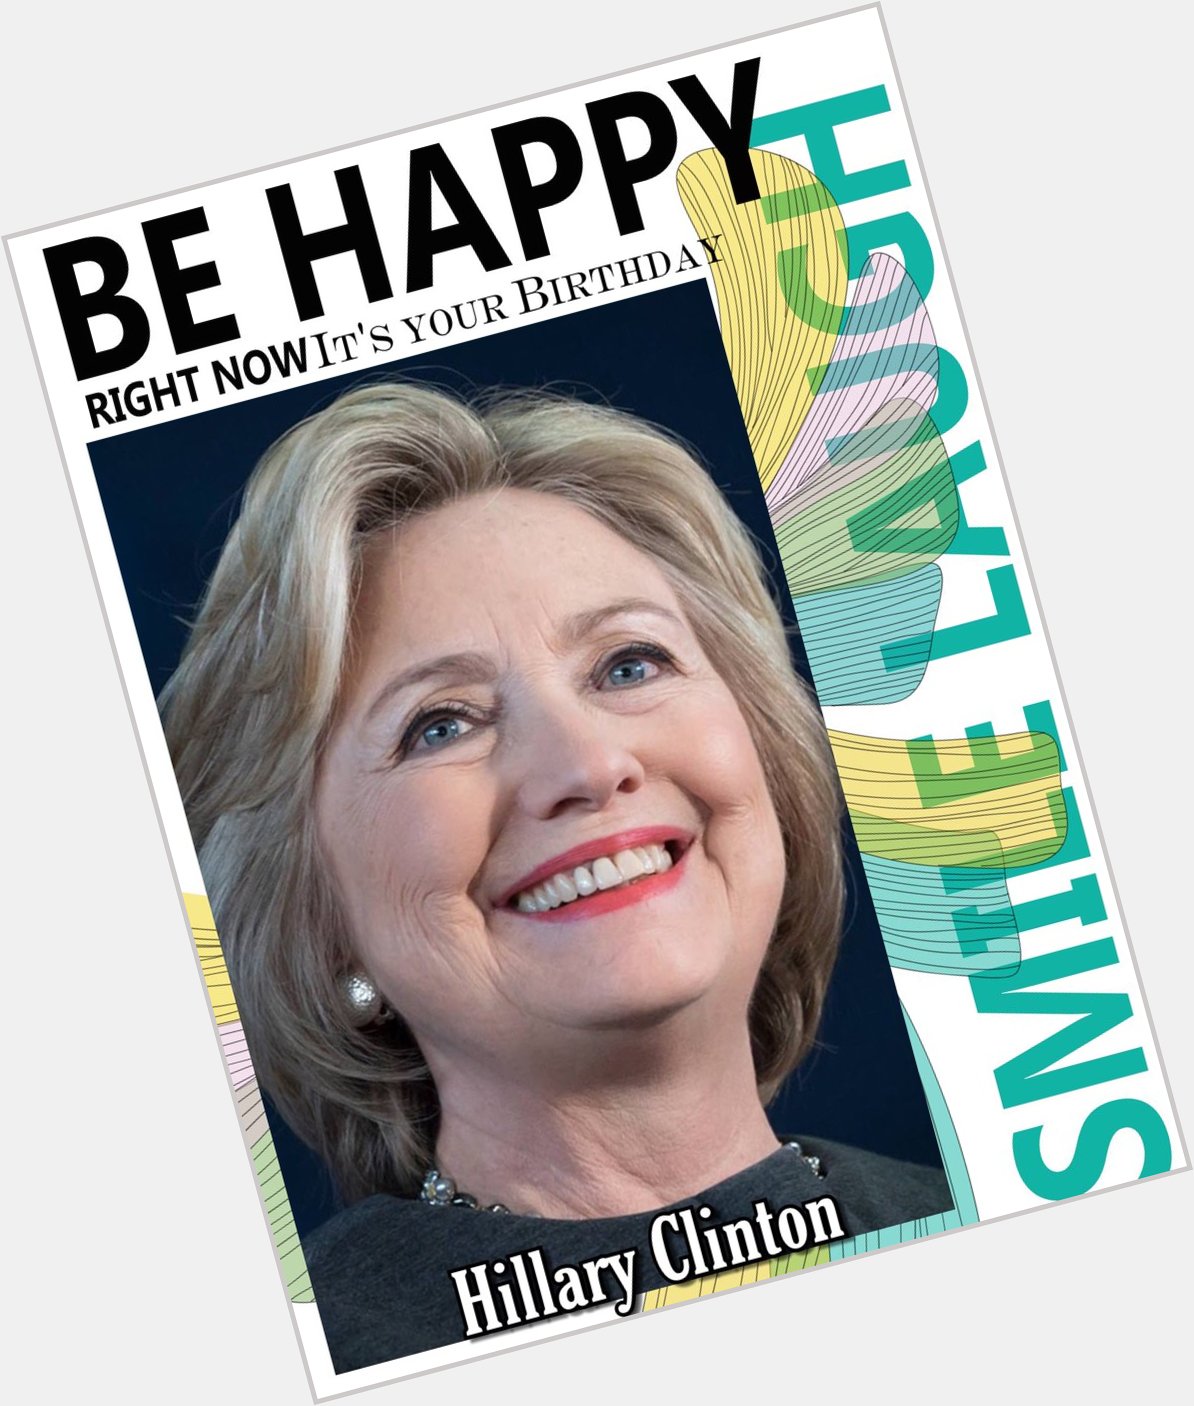 Happy Birthday Hillary Clinton, Rebecca Tunney, Claire Copper, Austin Healey, Audley Harrison & Judge Jules    